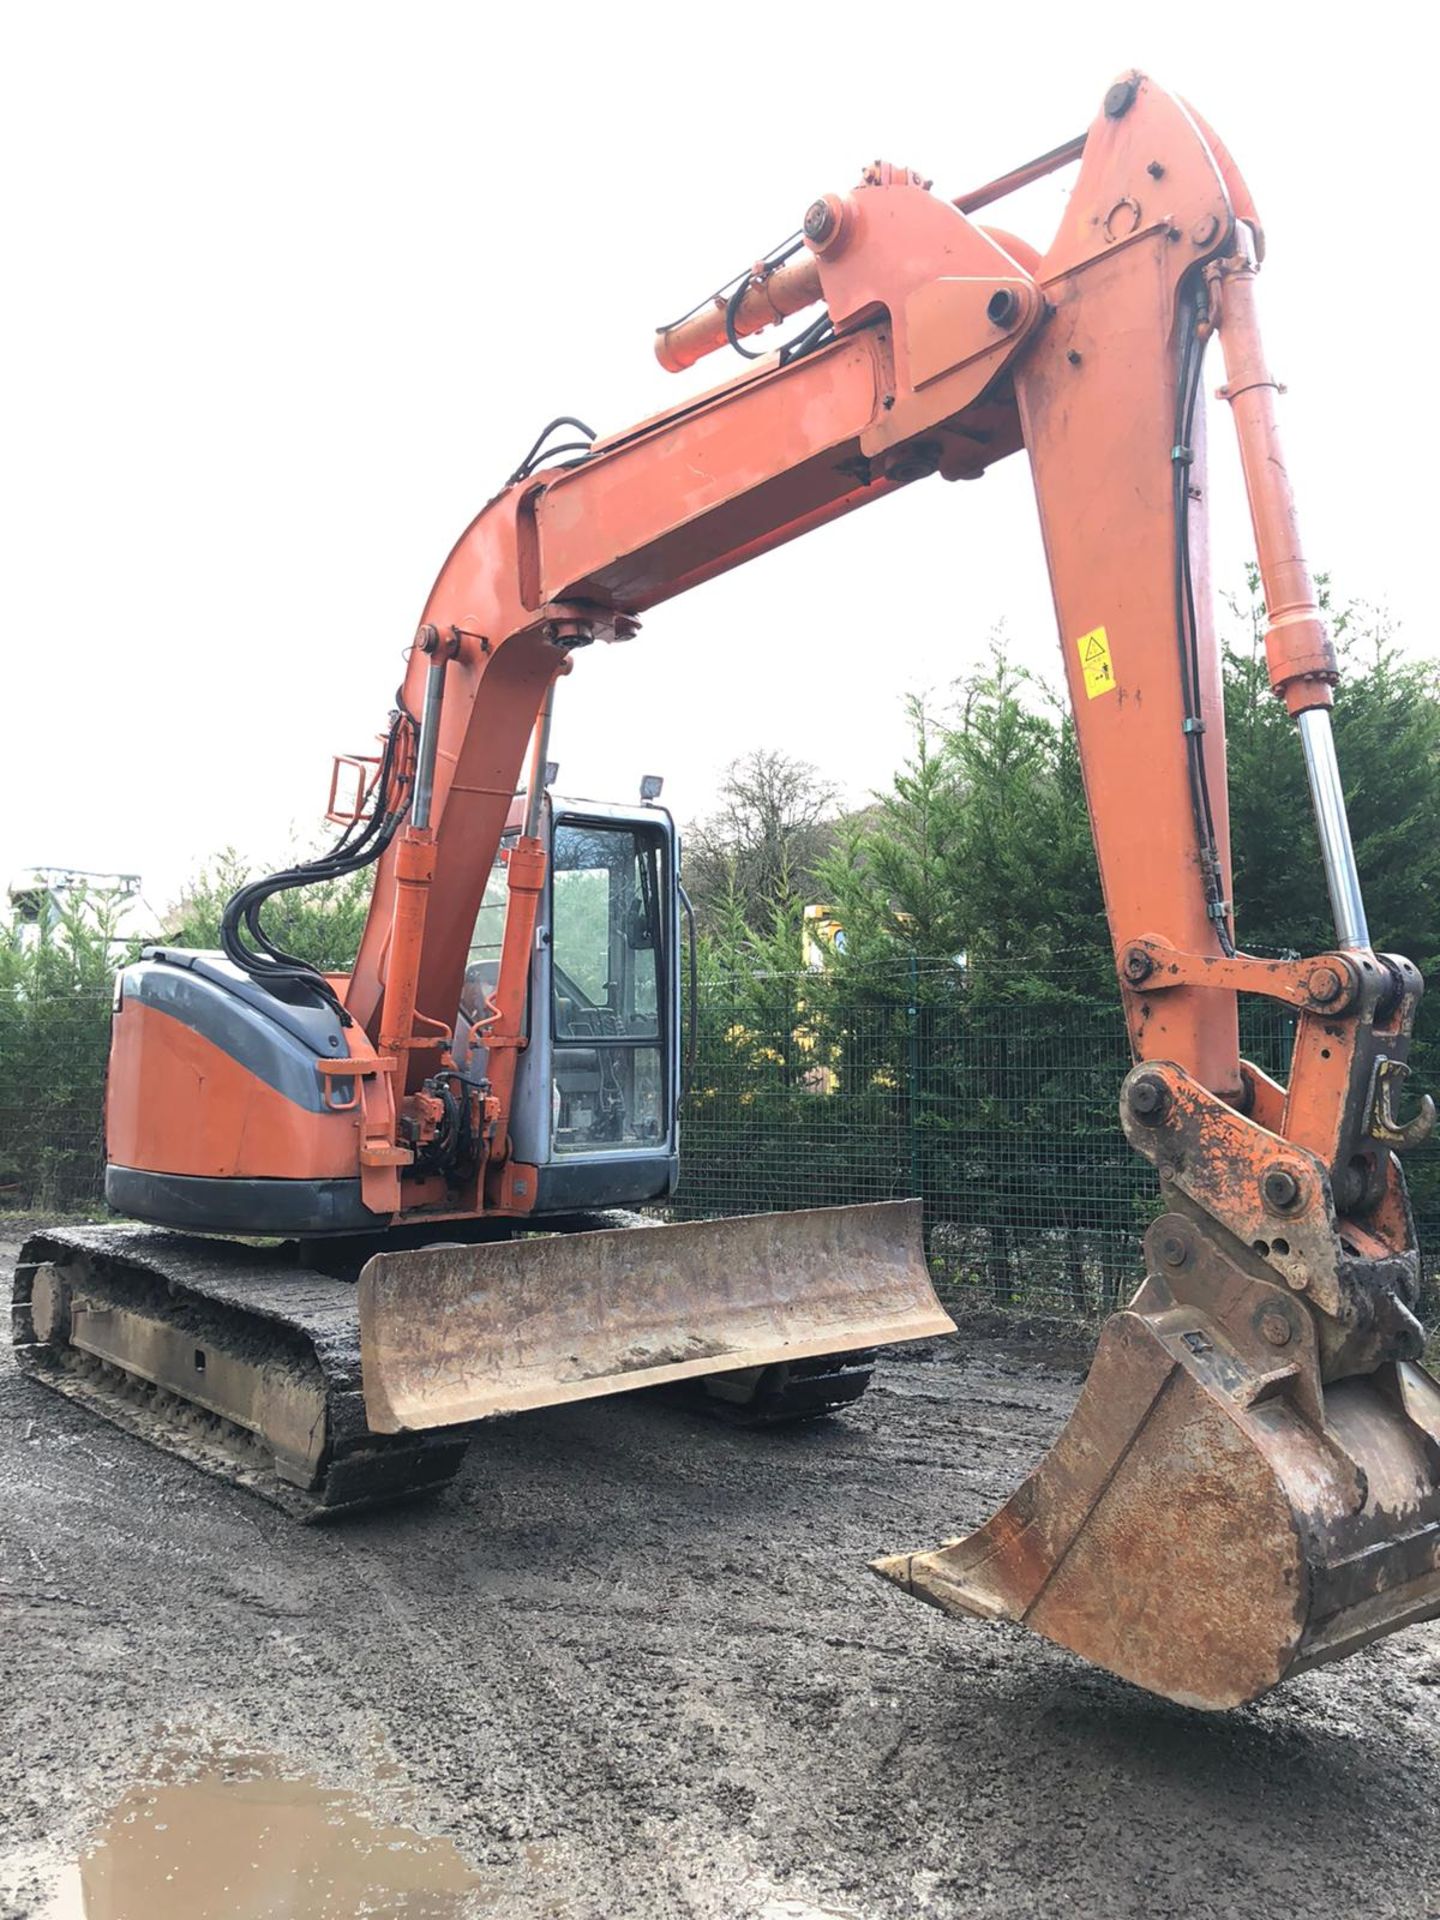 HITACHI EX135UR 13 TON TRACKED DIGGER / EXCAVATOR, RUNS, WORKS AND DIGS, SHOWING 6900 HOURS - Image 2 of 7